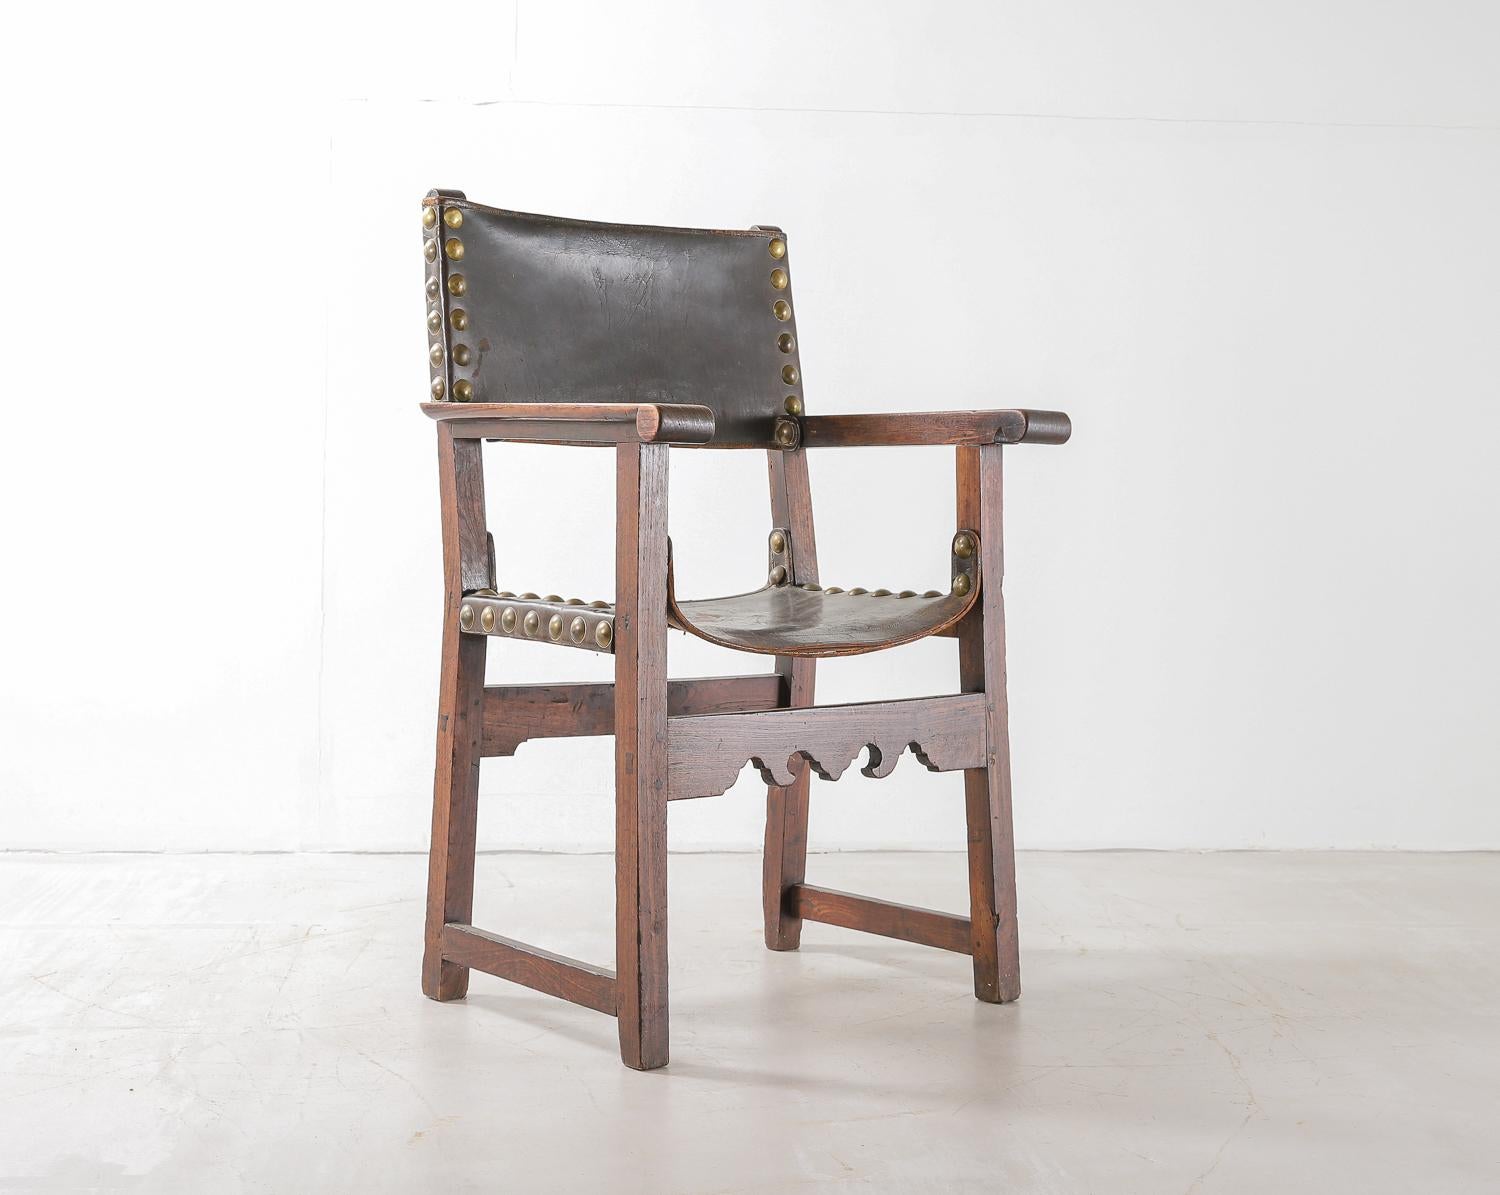 Spanish 18th Century Walnut and Leather Armchair In Good Condition For Sale In London, Charterhouse Square